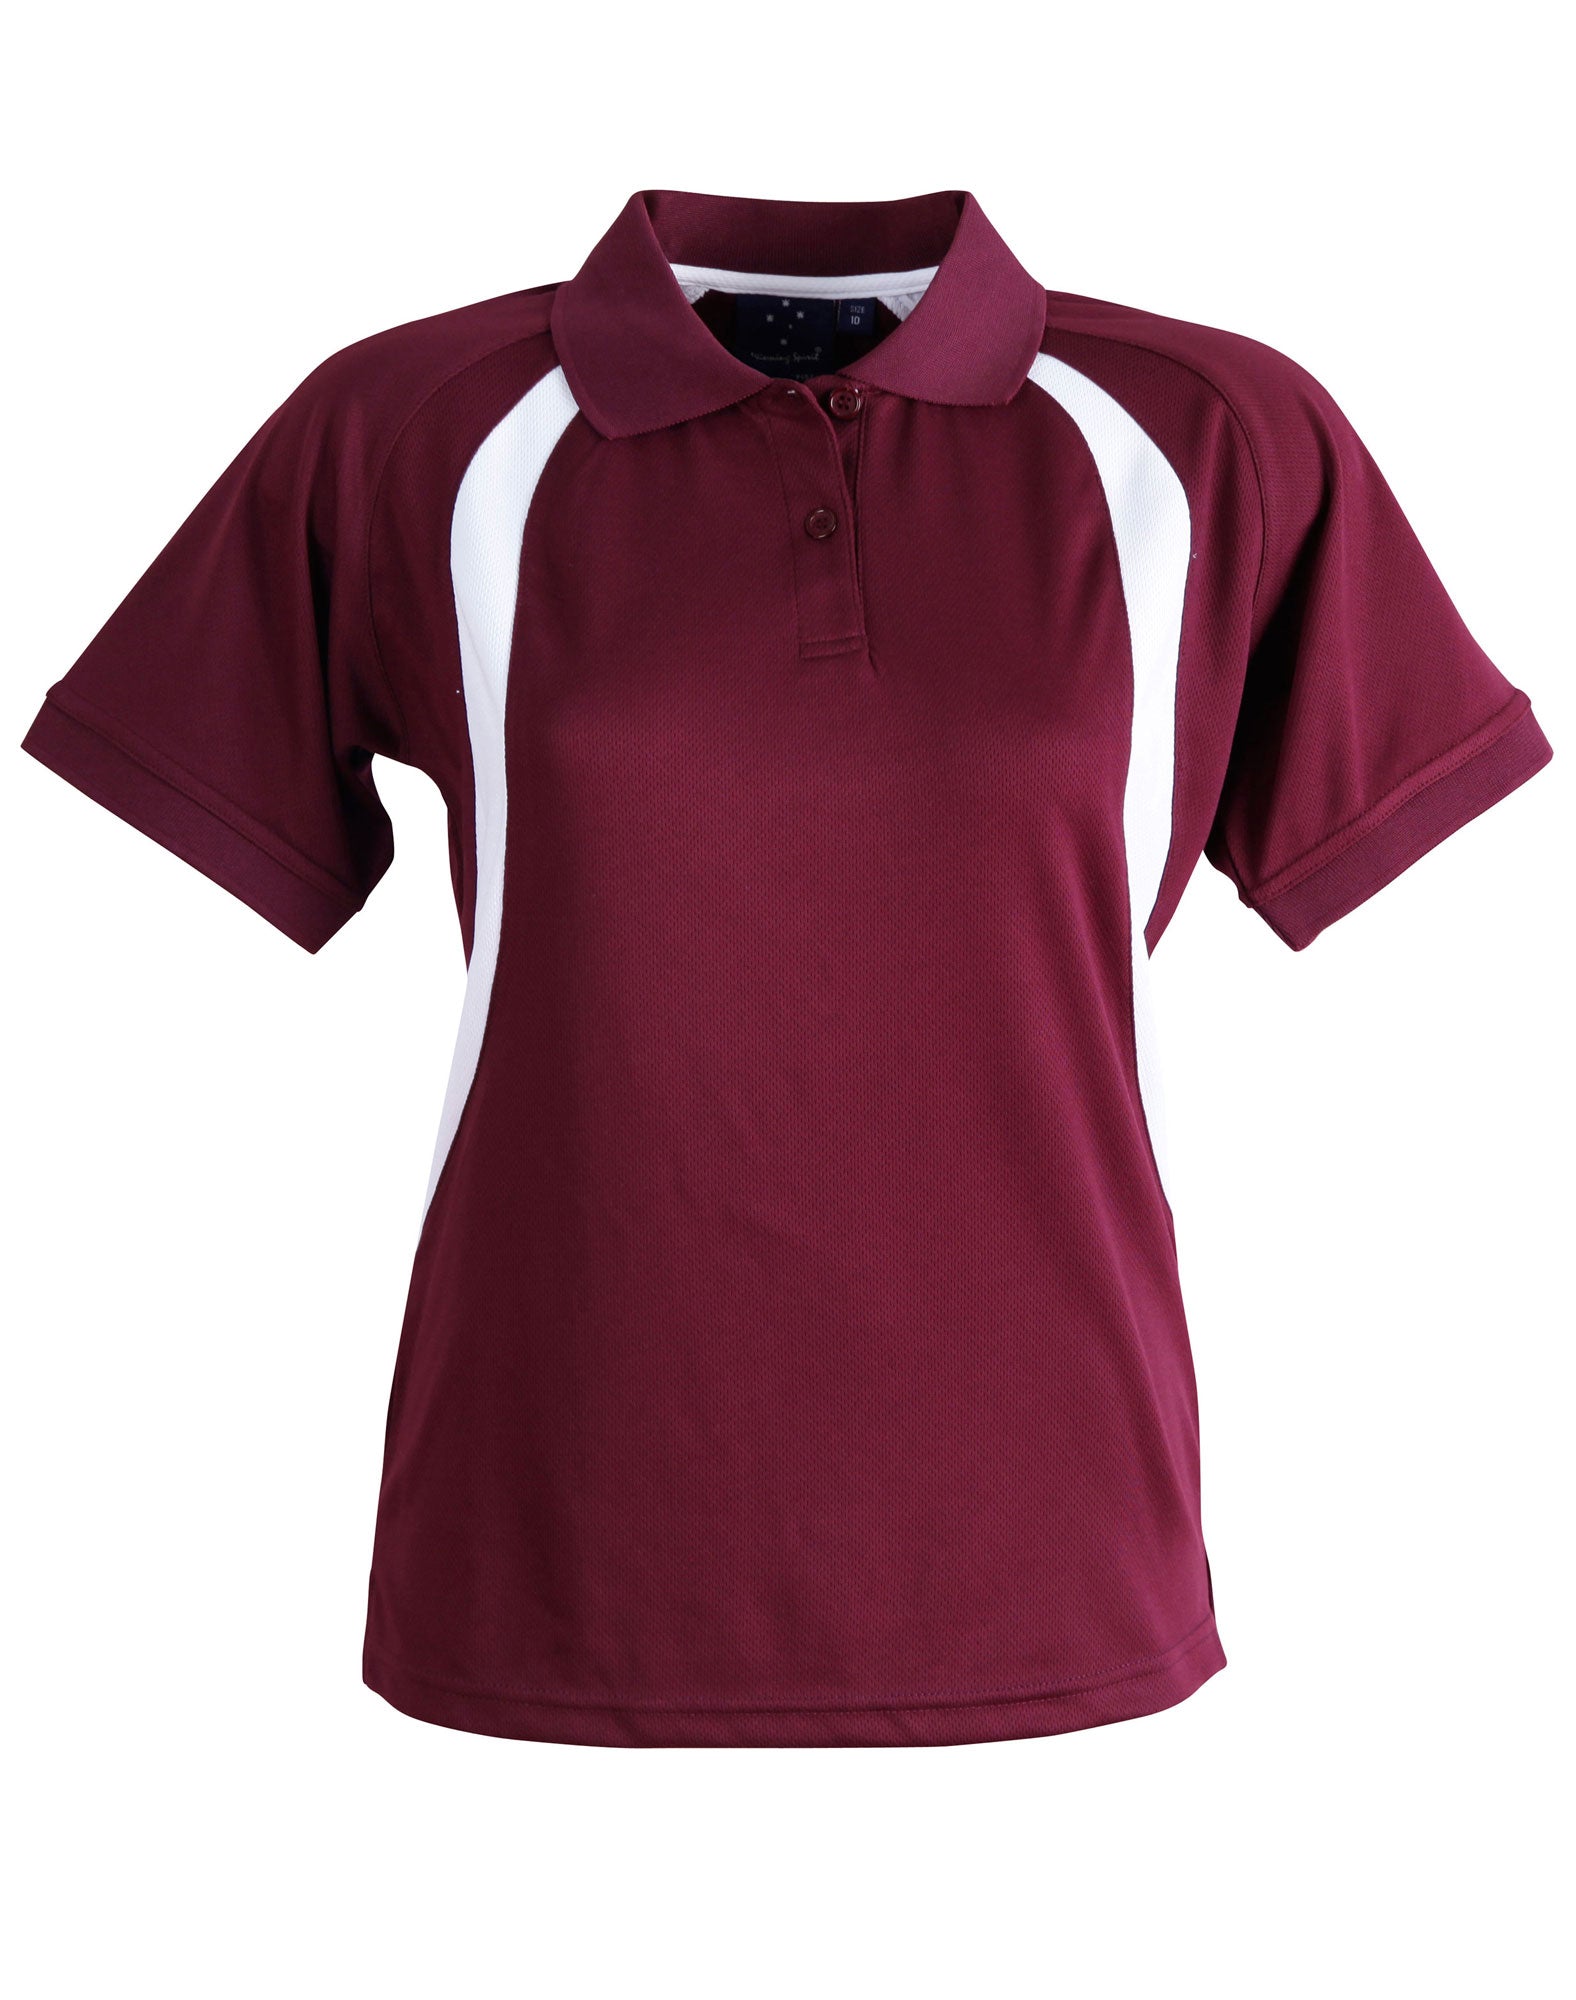 Ladies Olympian Polo Shirt - made by AIW